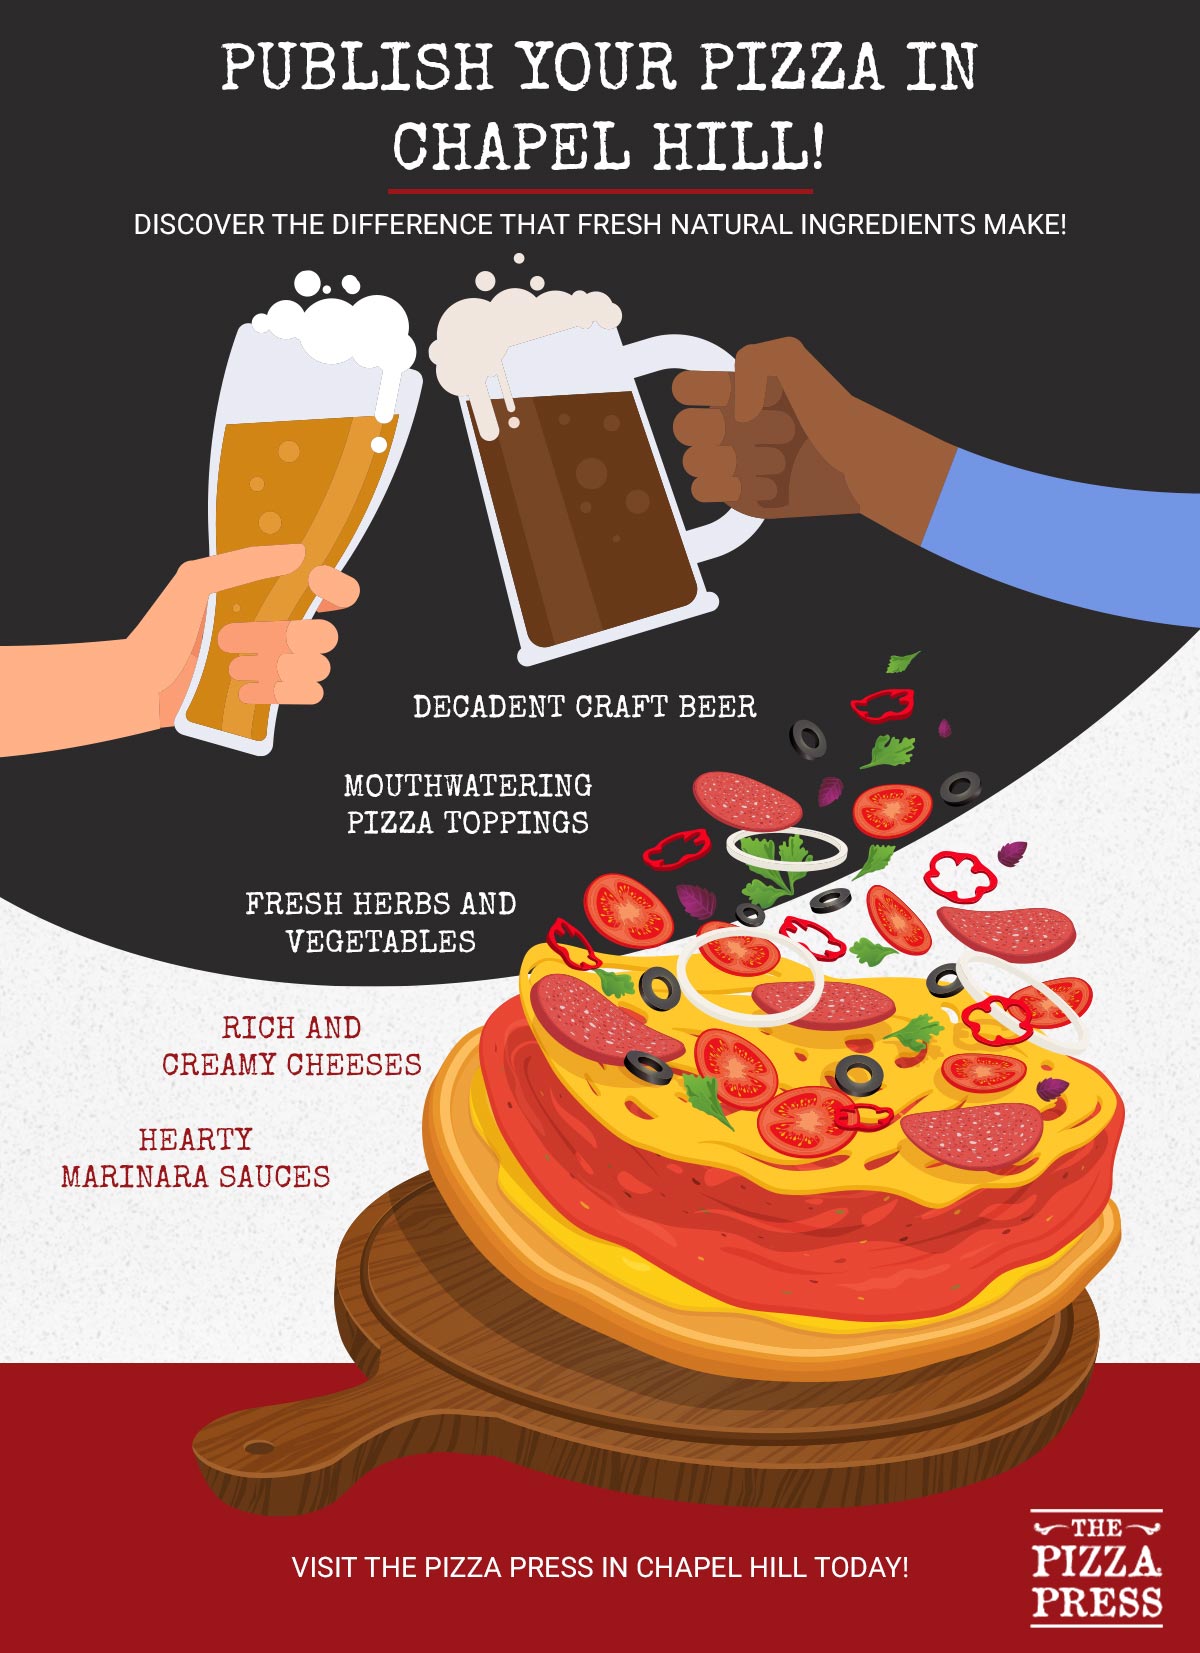 Publish-Your-Pizza-in-Chapel-Hill-Infographic-60c21b6f17b99